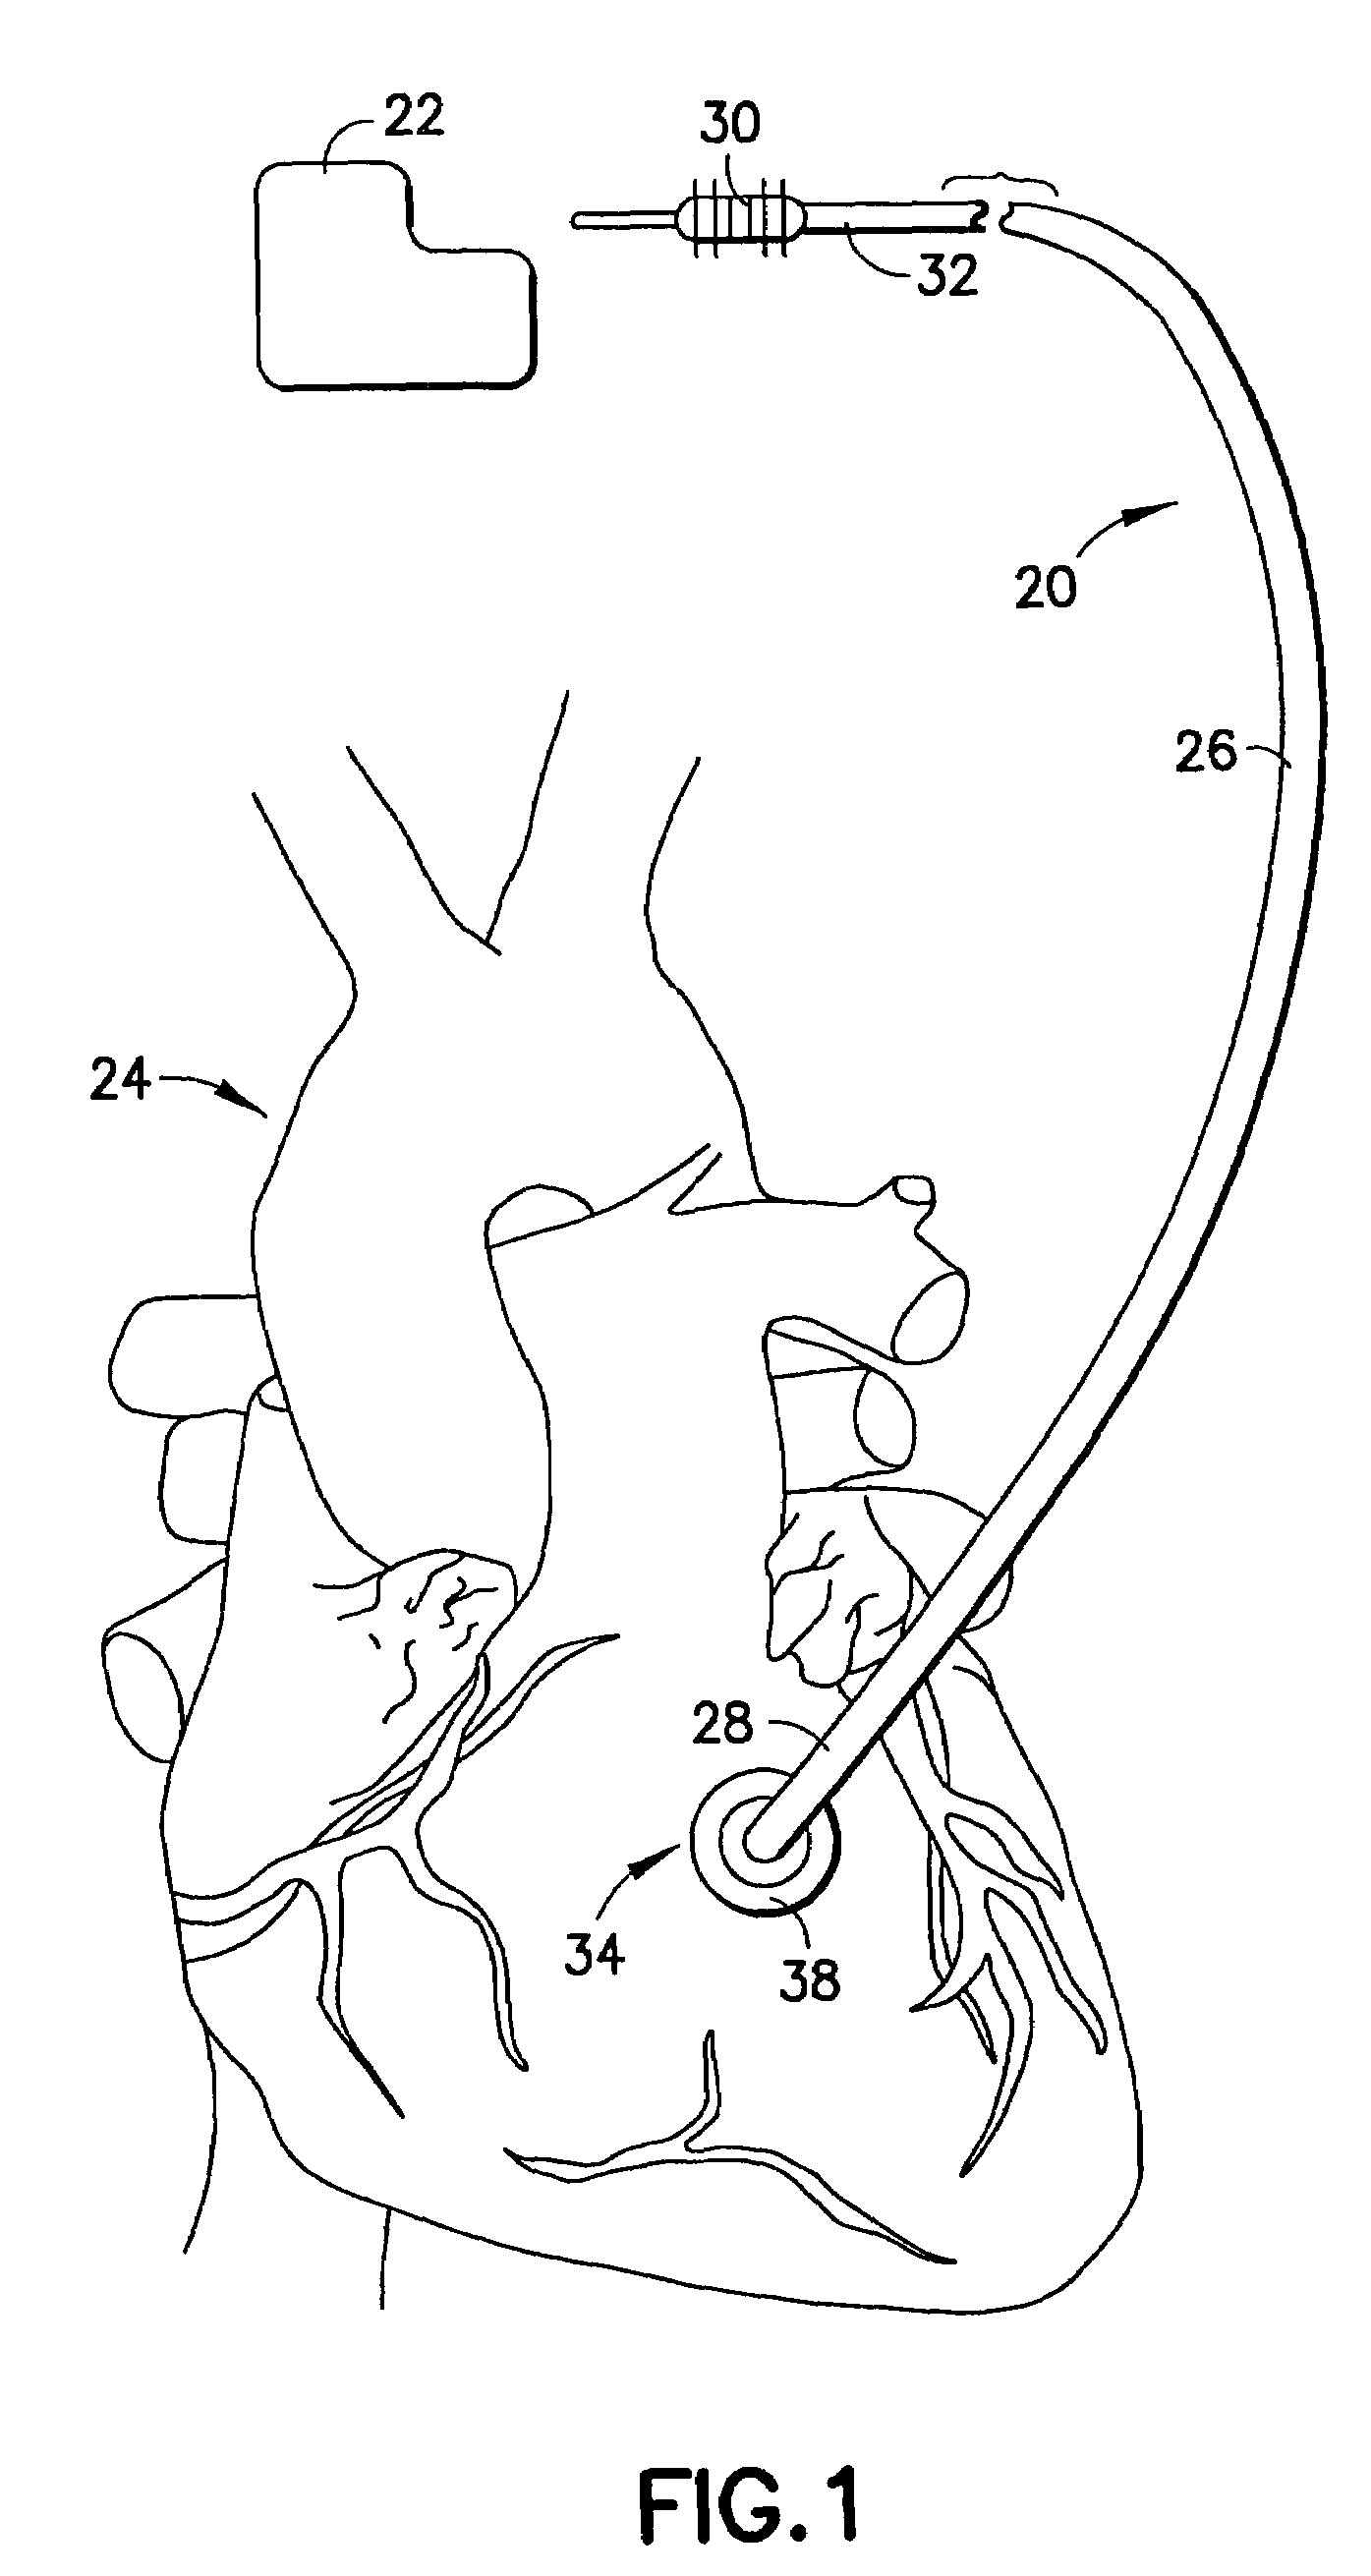 Epicardial and myocardial leads for implanting in the heart by thoracotomy or port access surgeries with detachable electrode tip